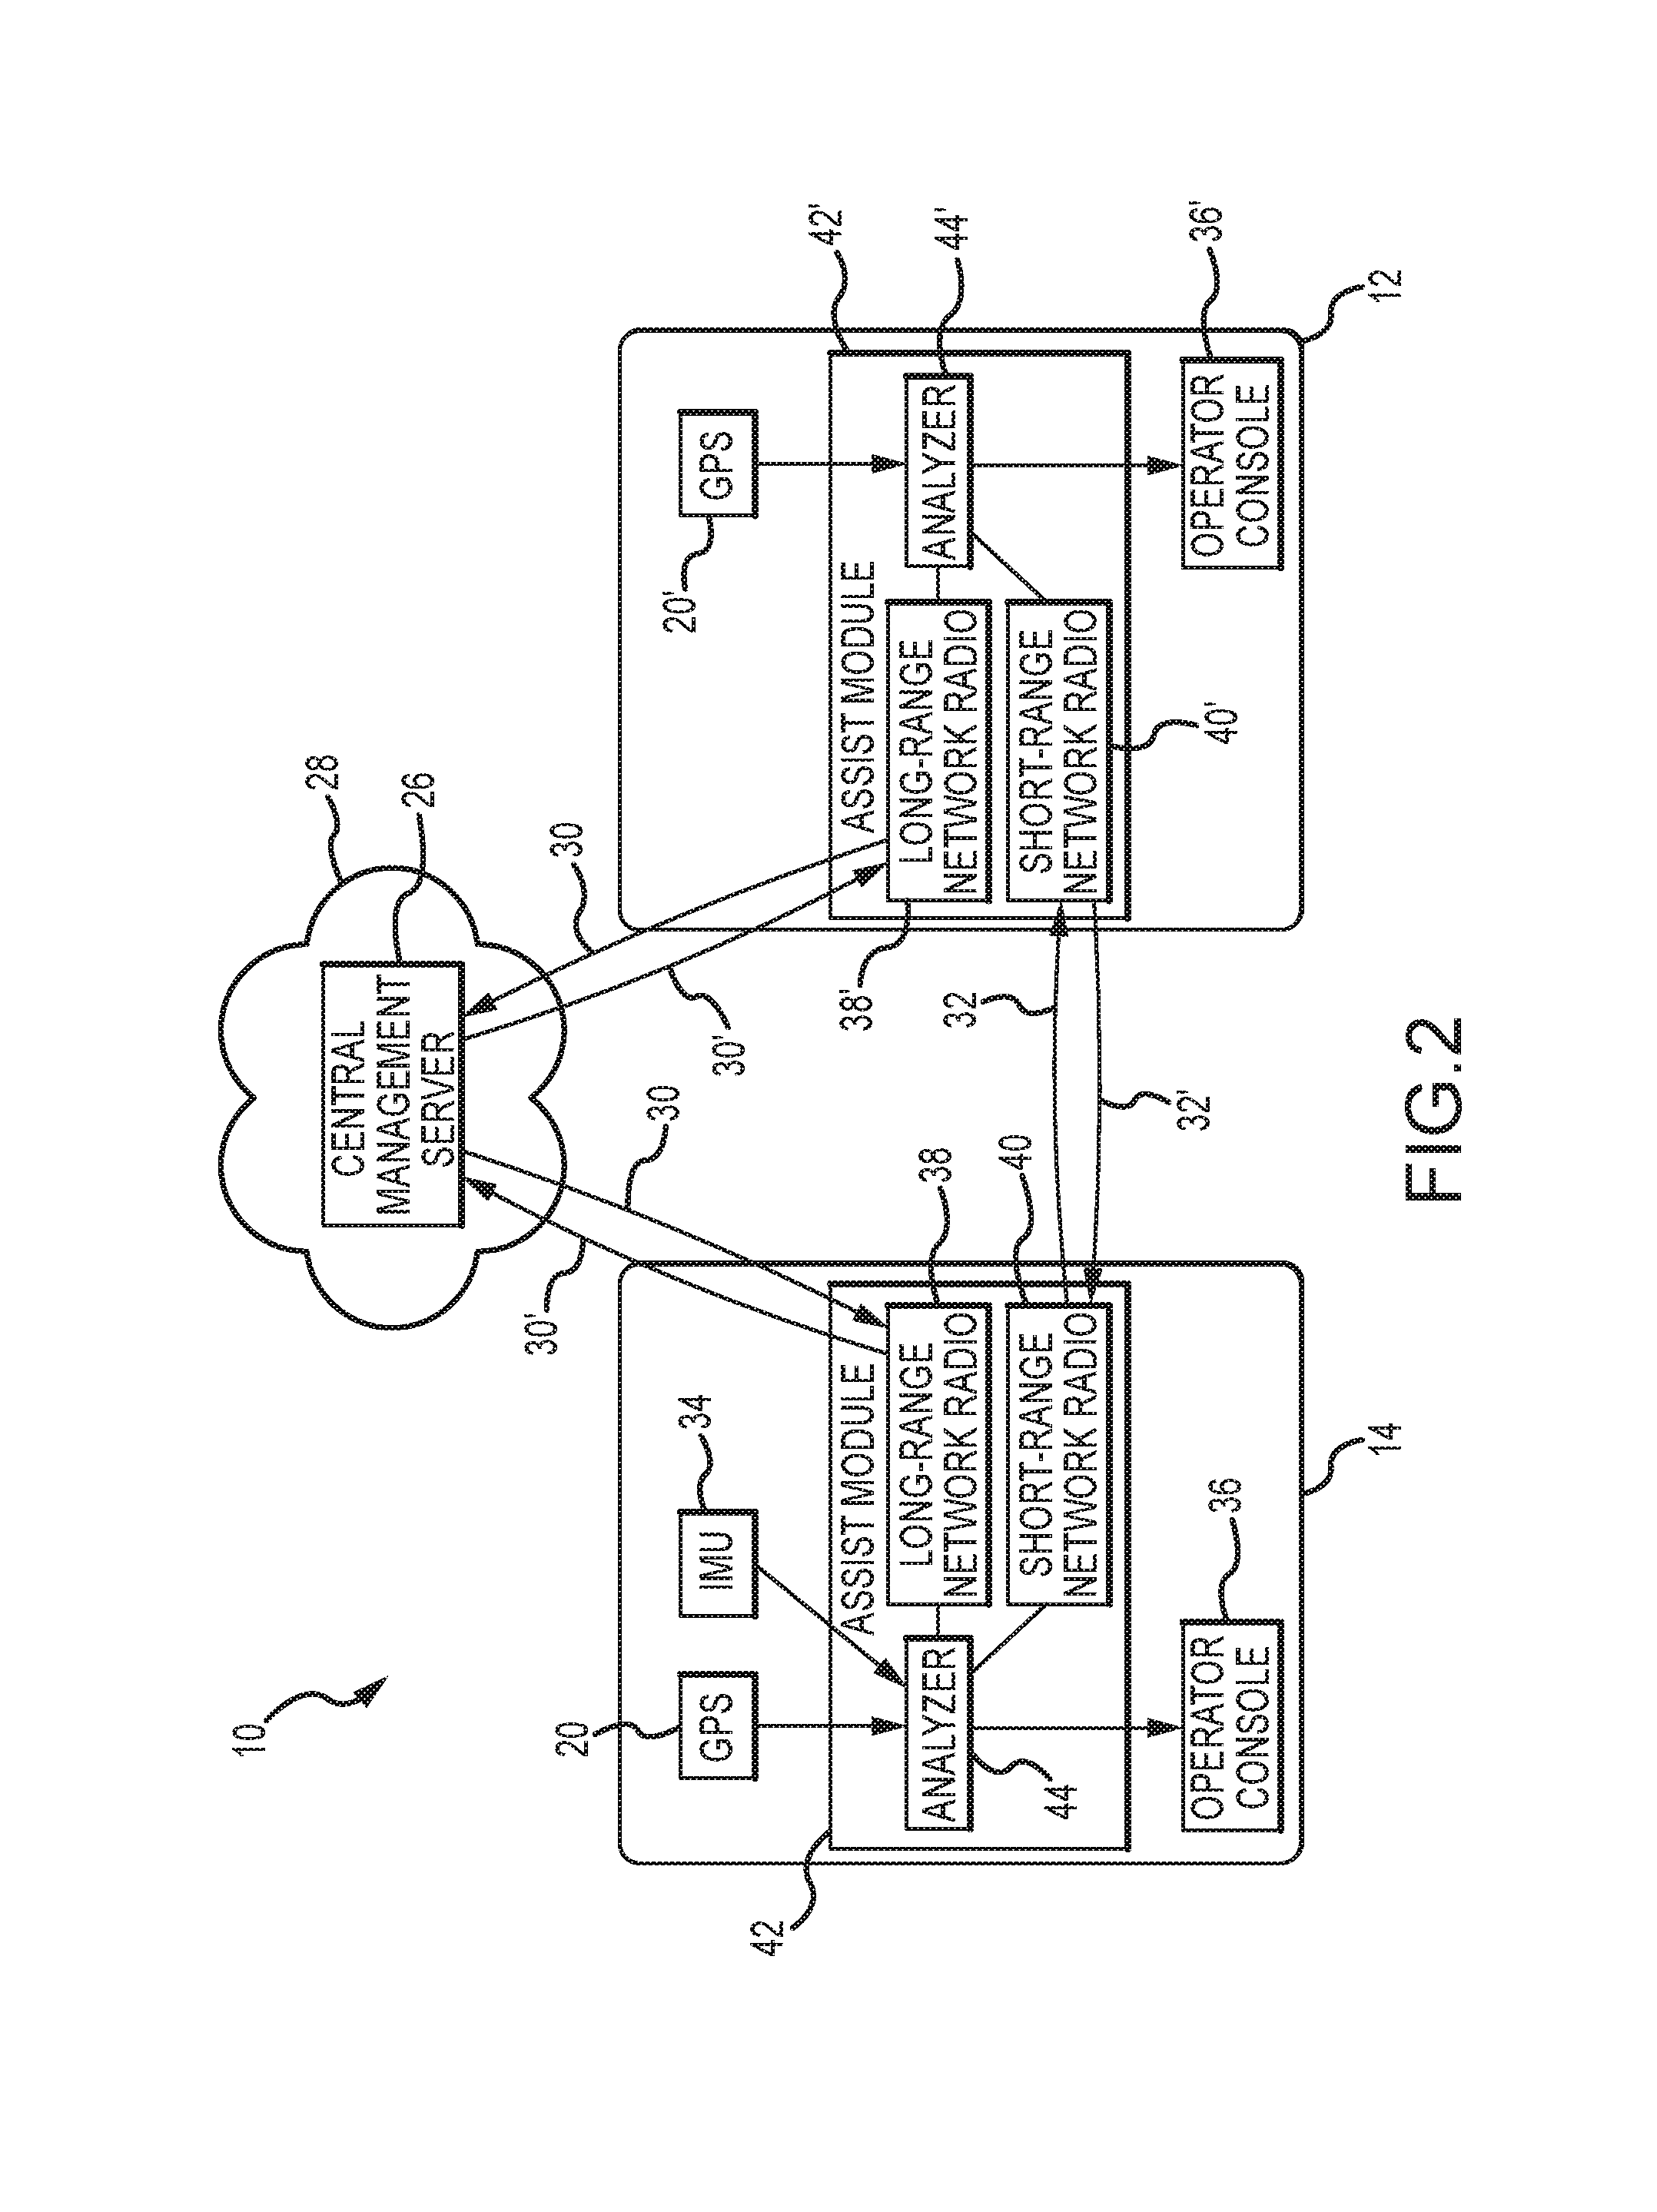 Assistive vehicular guidance system and method